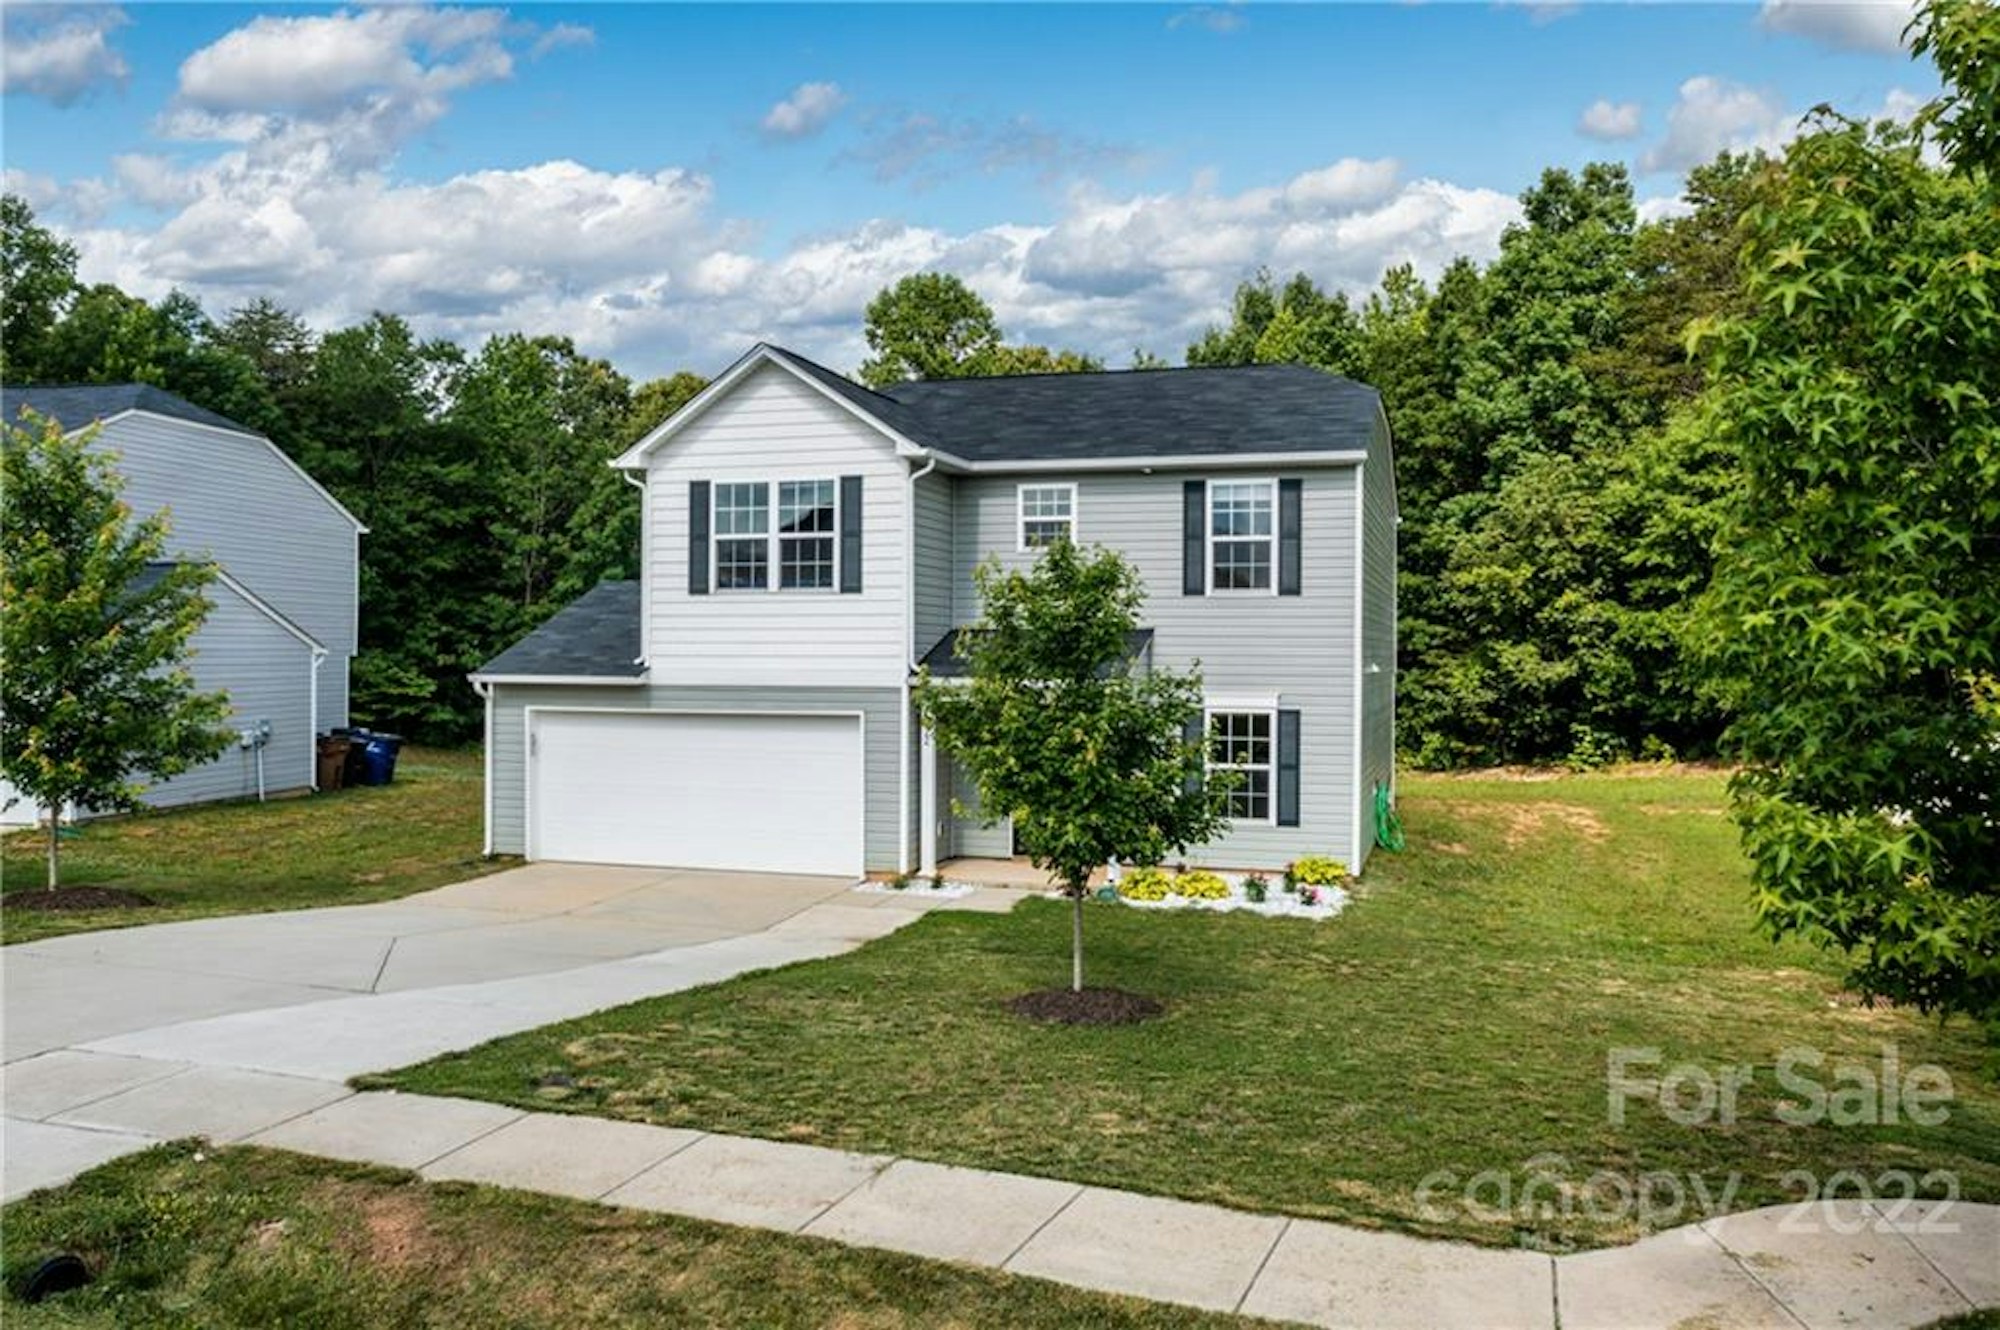 Photo 1 of 21 - 222 Valerie Dr, Lincolnton, NC 28092